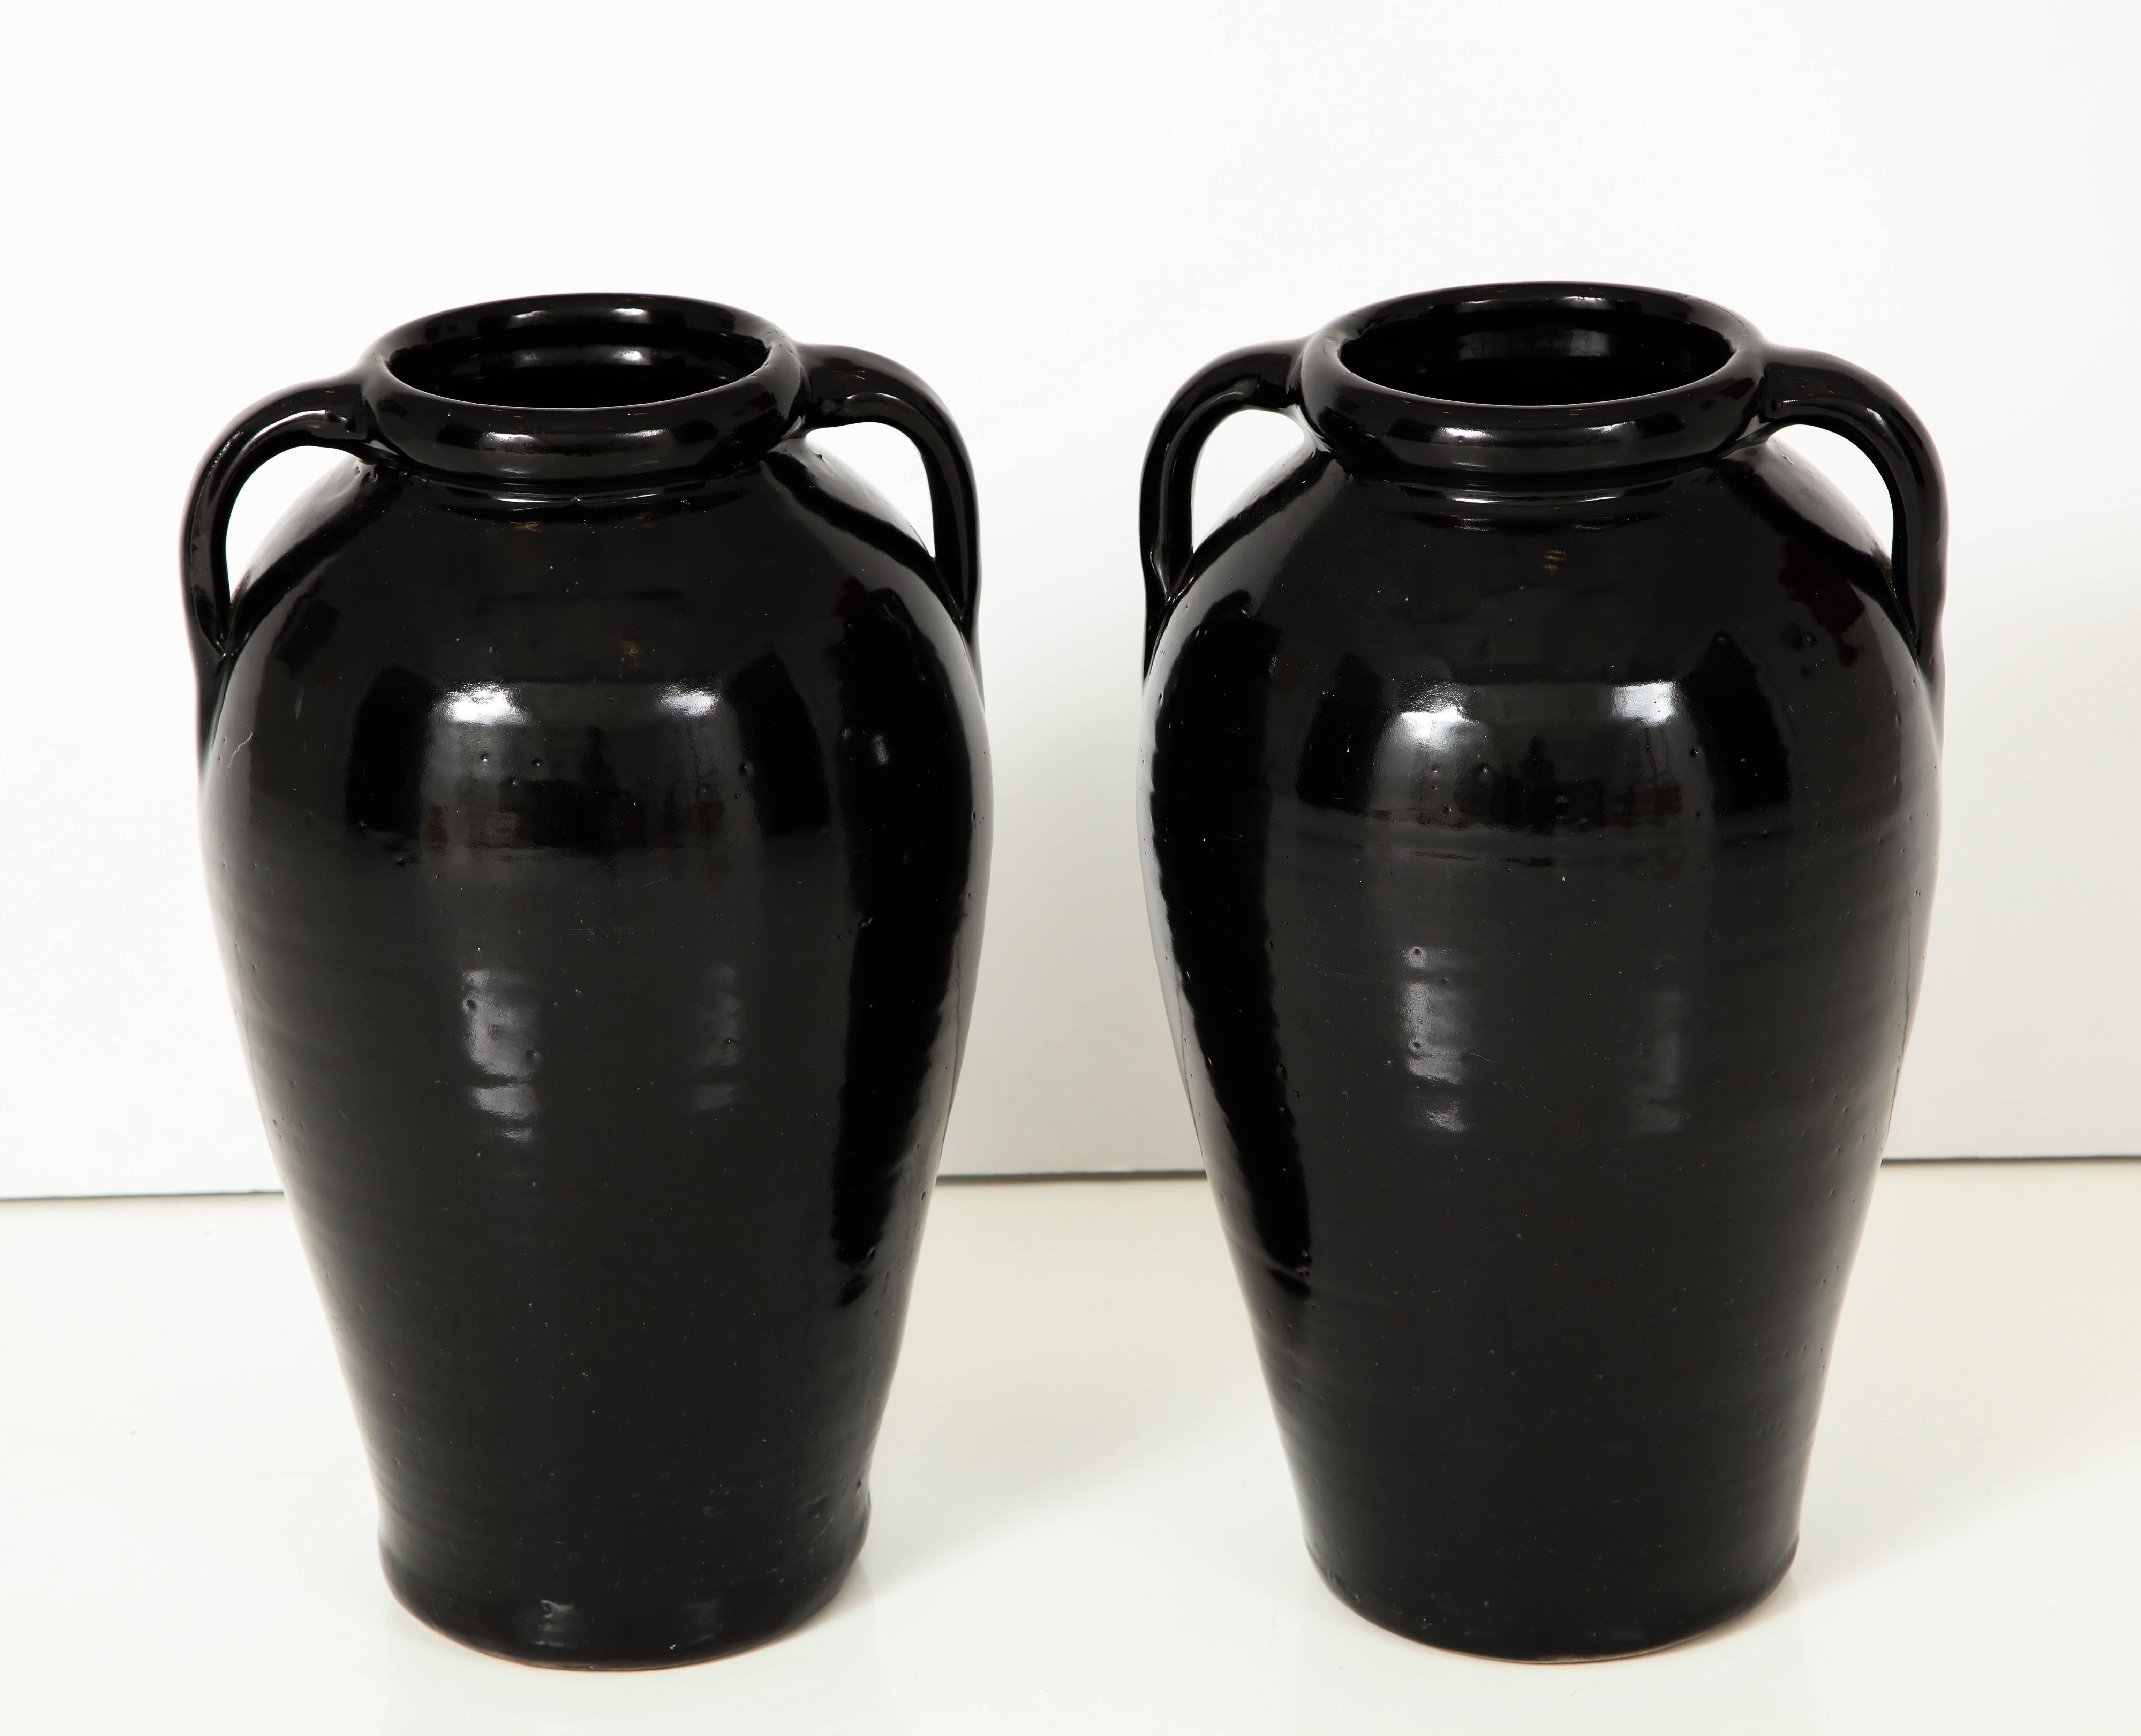 A grand scale and striking pair of black glazed stone ware vases or jars with handles; of very heavy weight. 
American, mid-20th century 
Size: 18 1/2